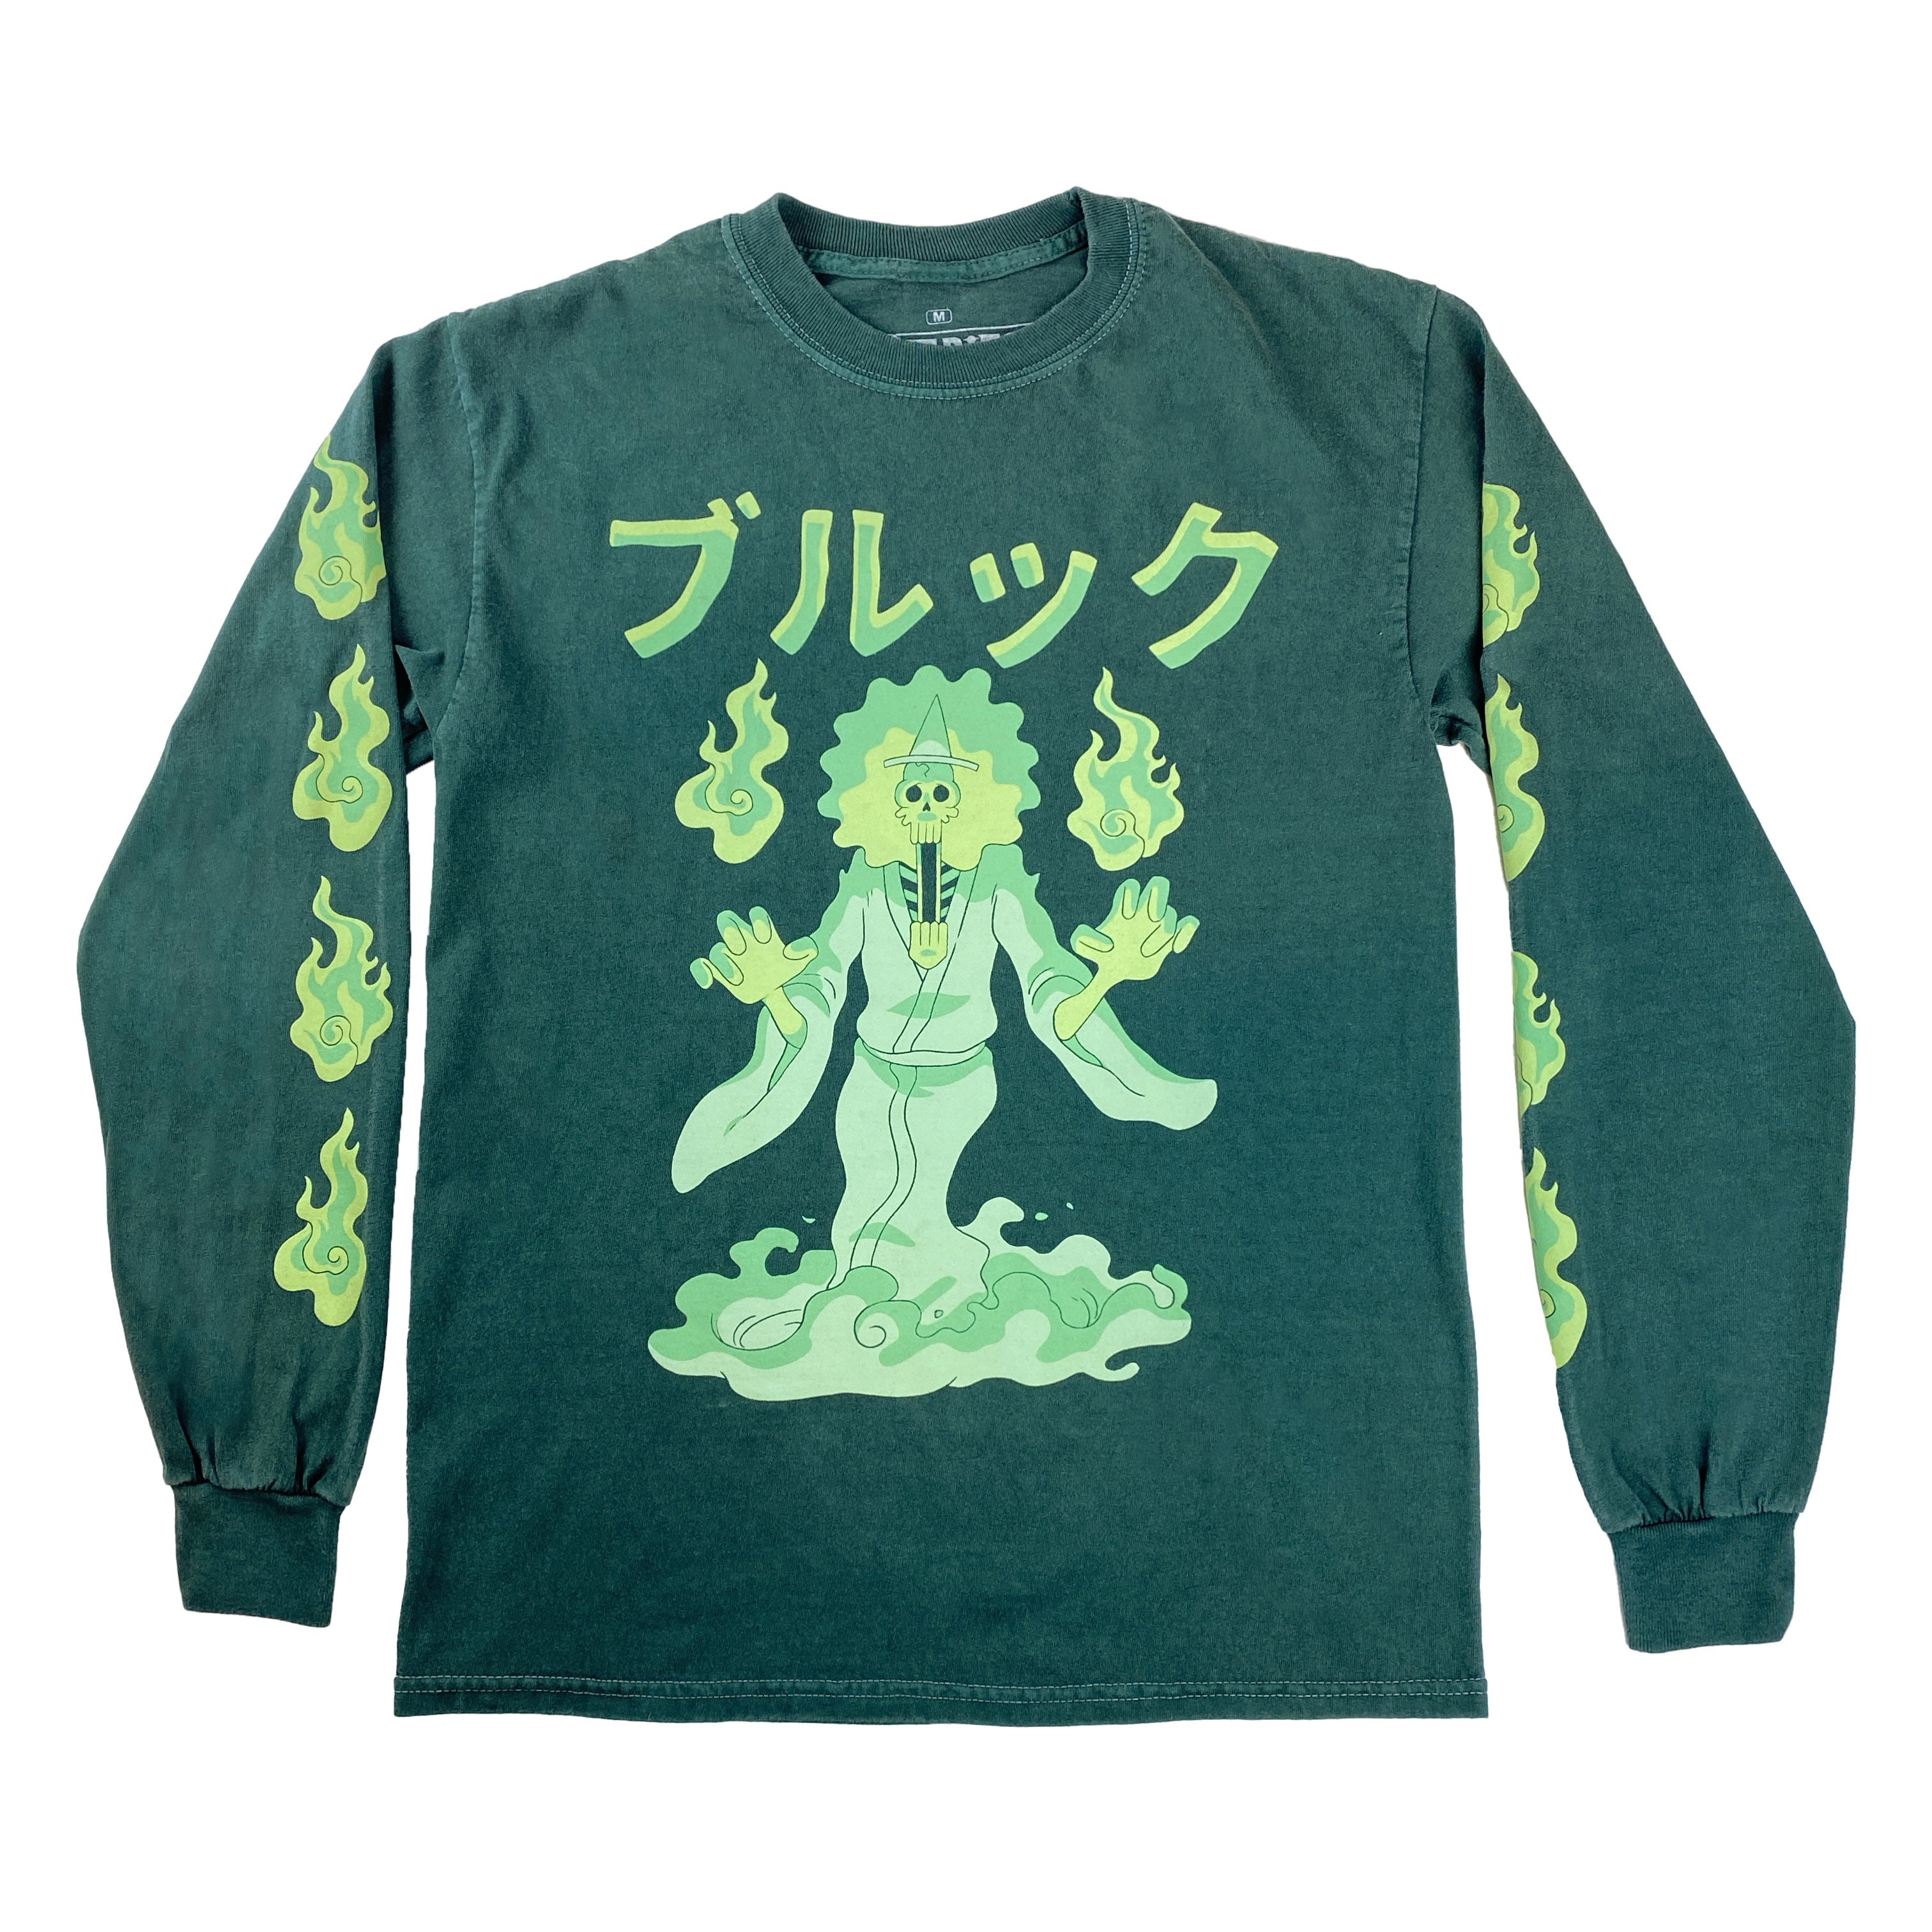 One Piece - Soul Brook Long Sleeve - Crunchyroll Exclusive! image count 0